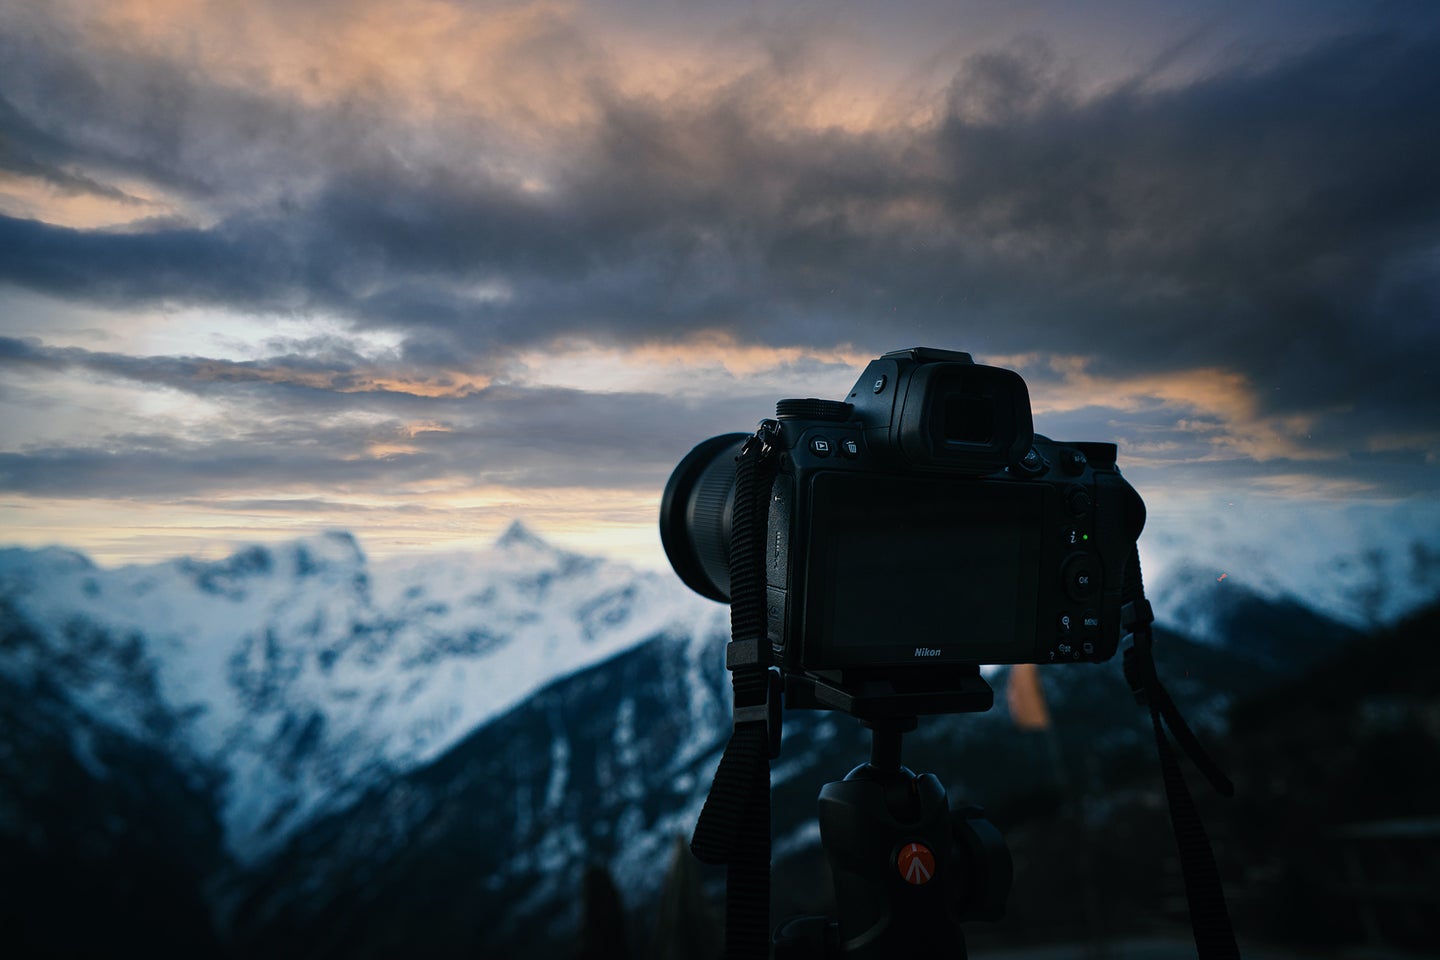 Best full frame camera on a tripod in front of a cloudy sky and snowy mountain